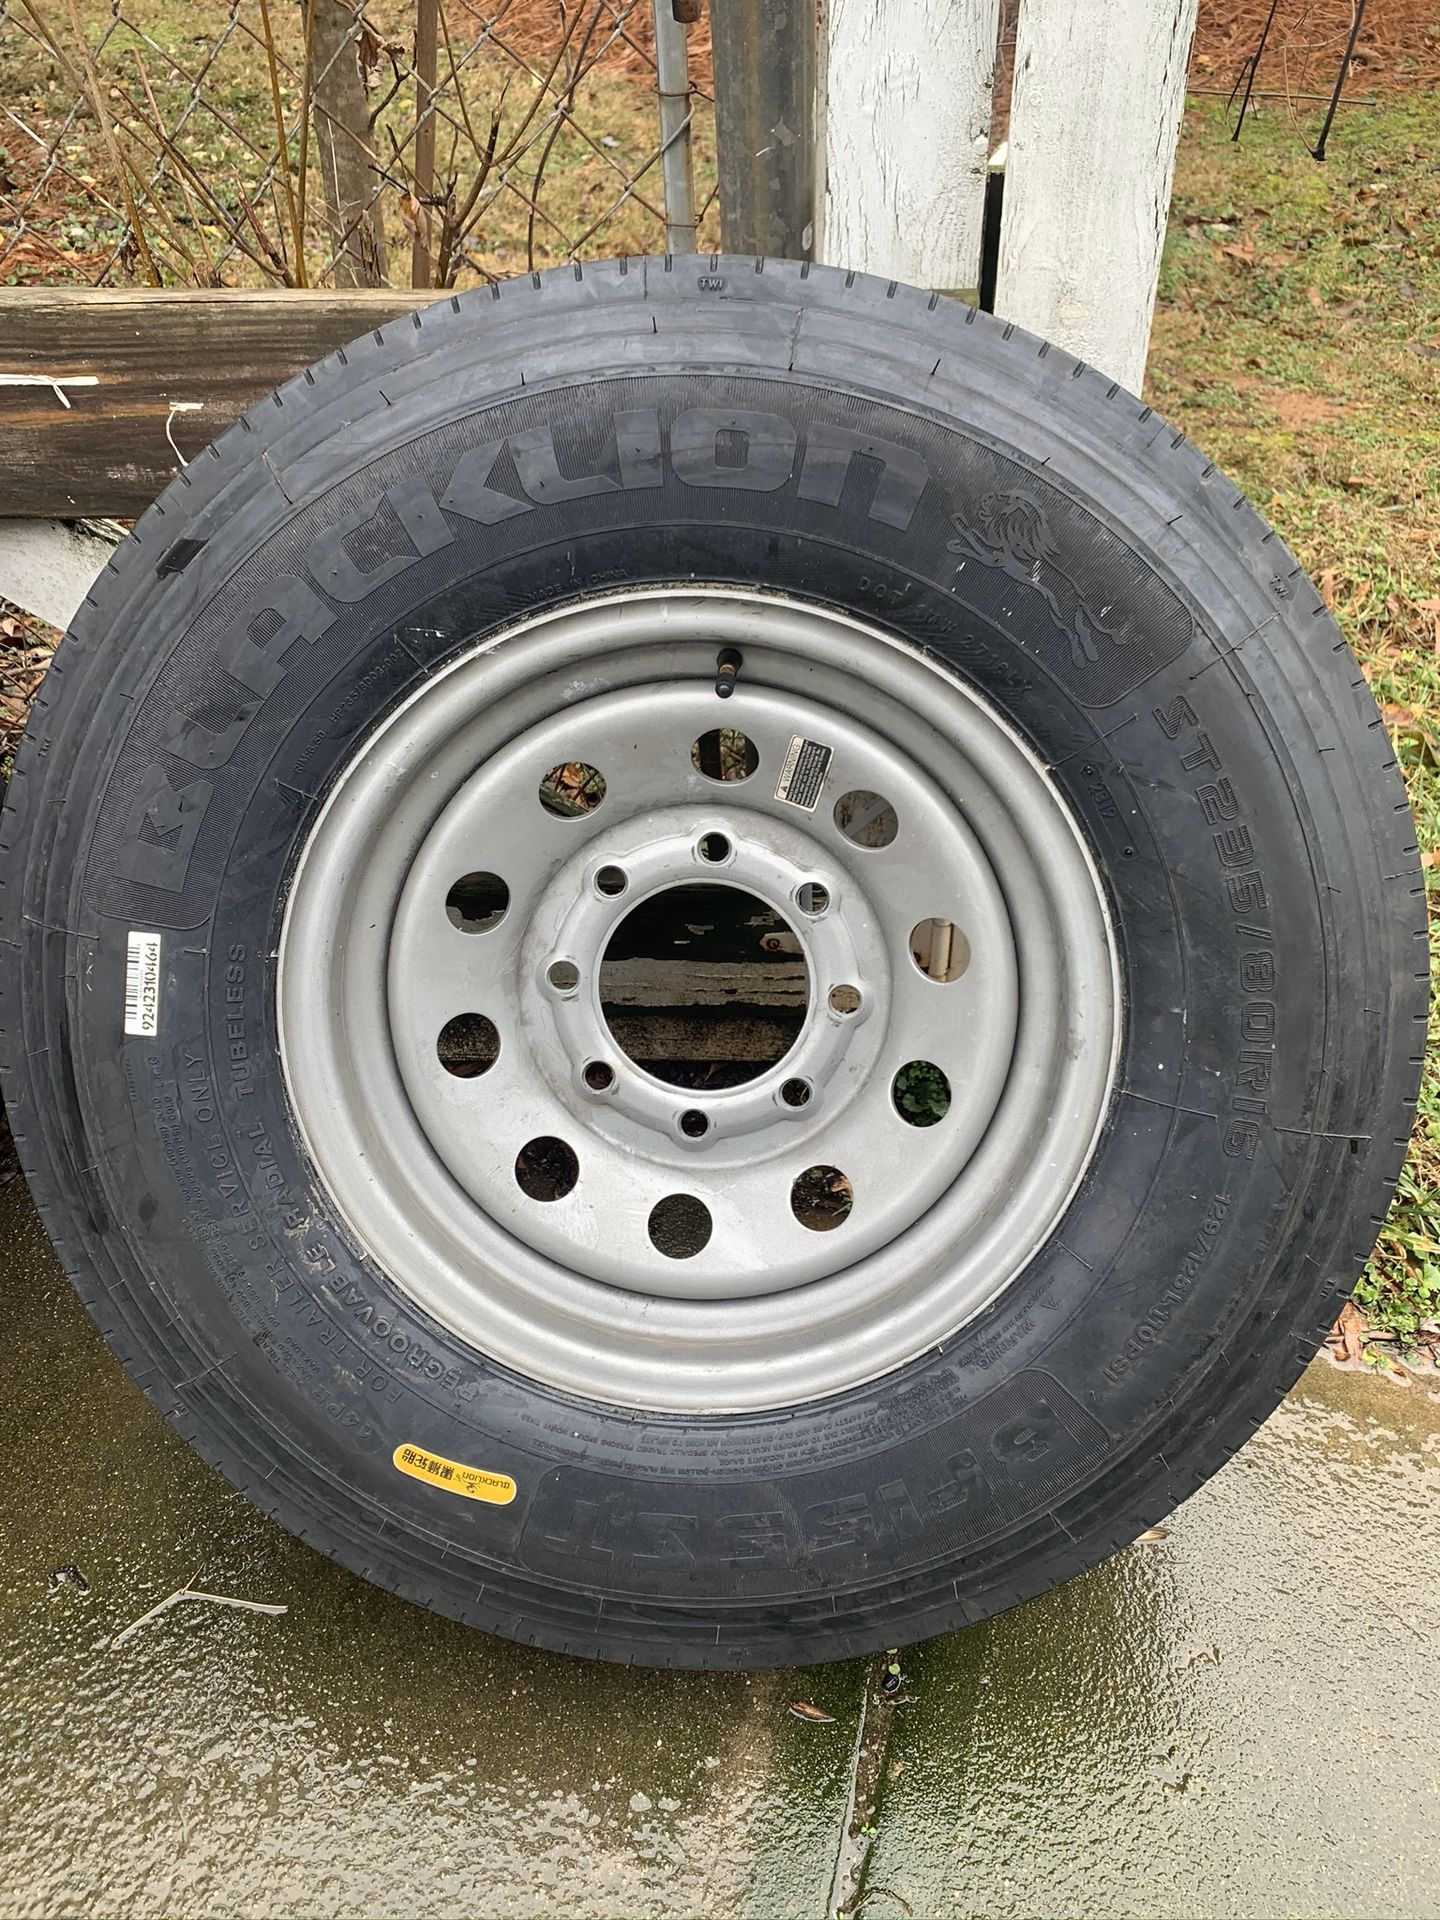 4 New Trailer Tires. Good for car carrier trailers or flatbeds, etc.